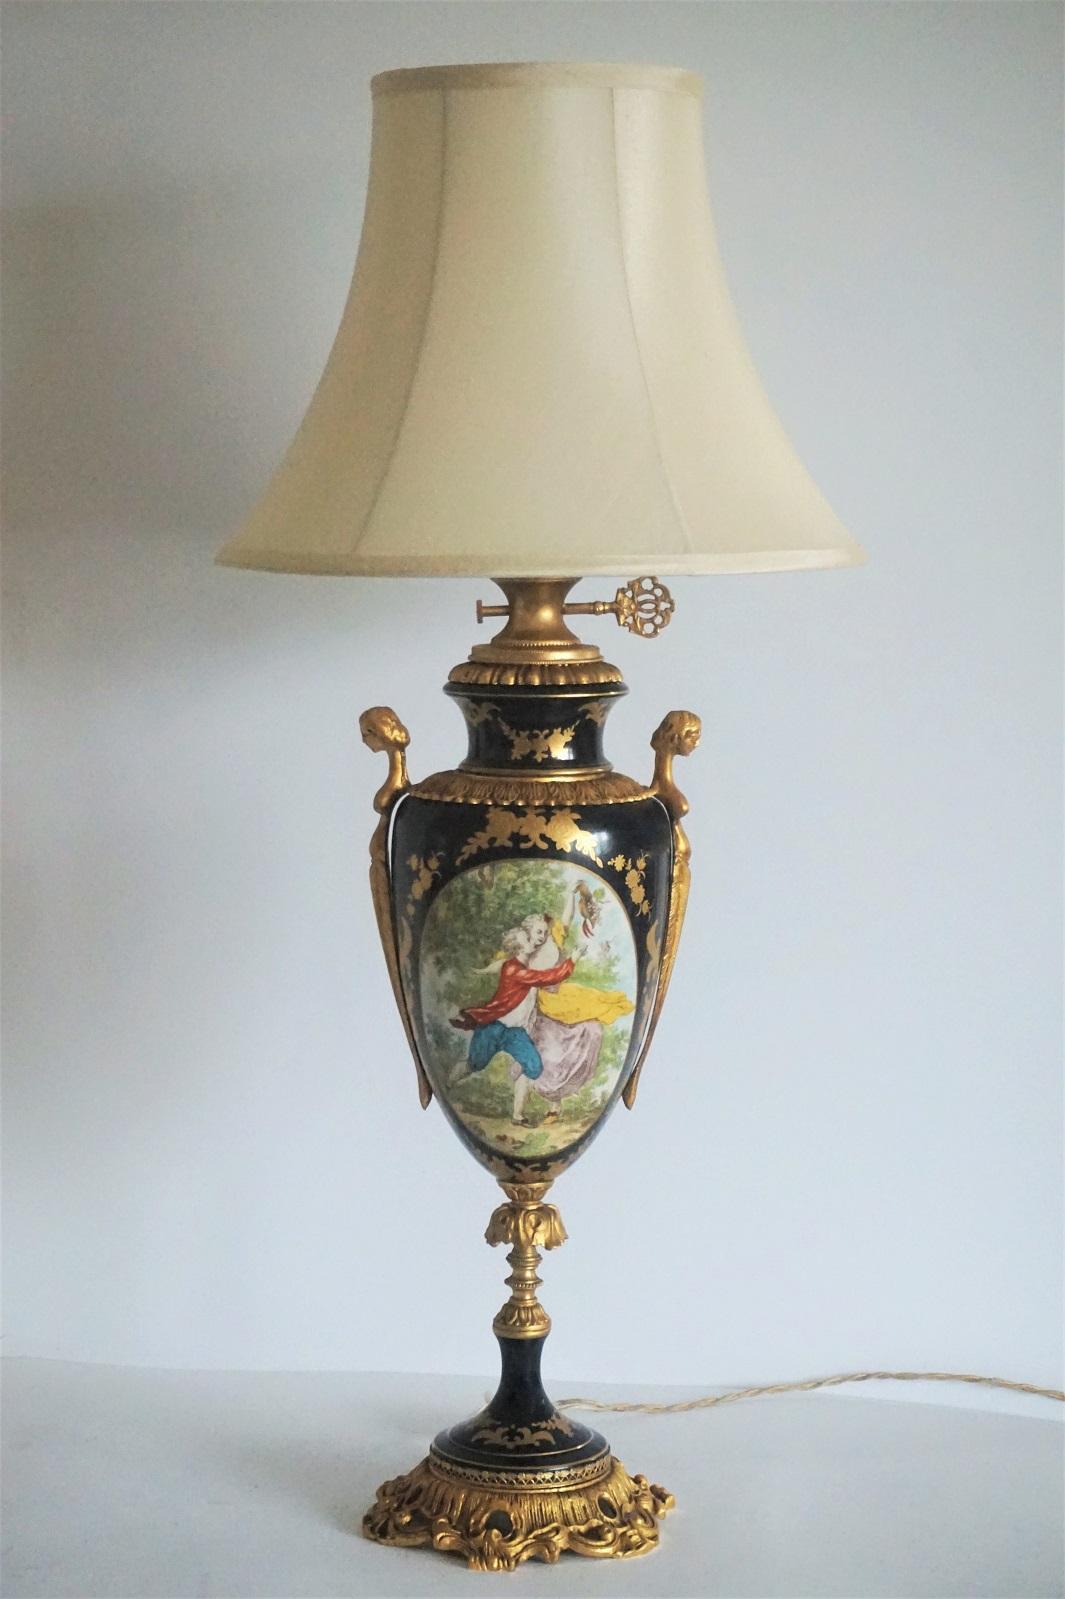 A large French Sèvres style gilt bronze ormolu-mounted cobalt blue hand painted porcelain urn table lamp, first half of the 20th century. Bronze figurine handles, front side with hand painted romantic scene of young couple surrounded by gold